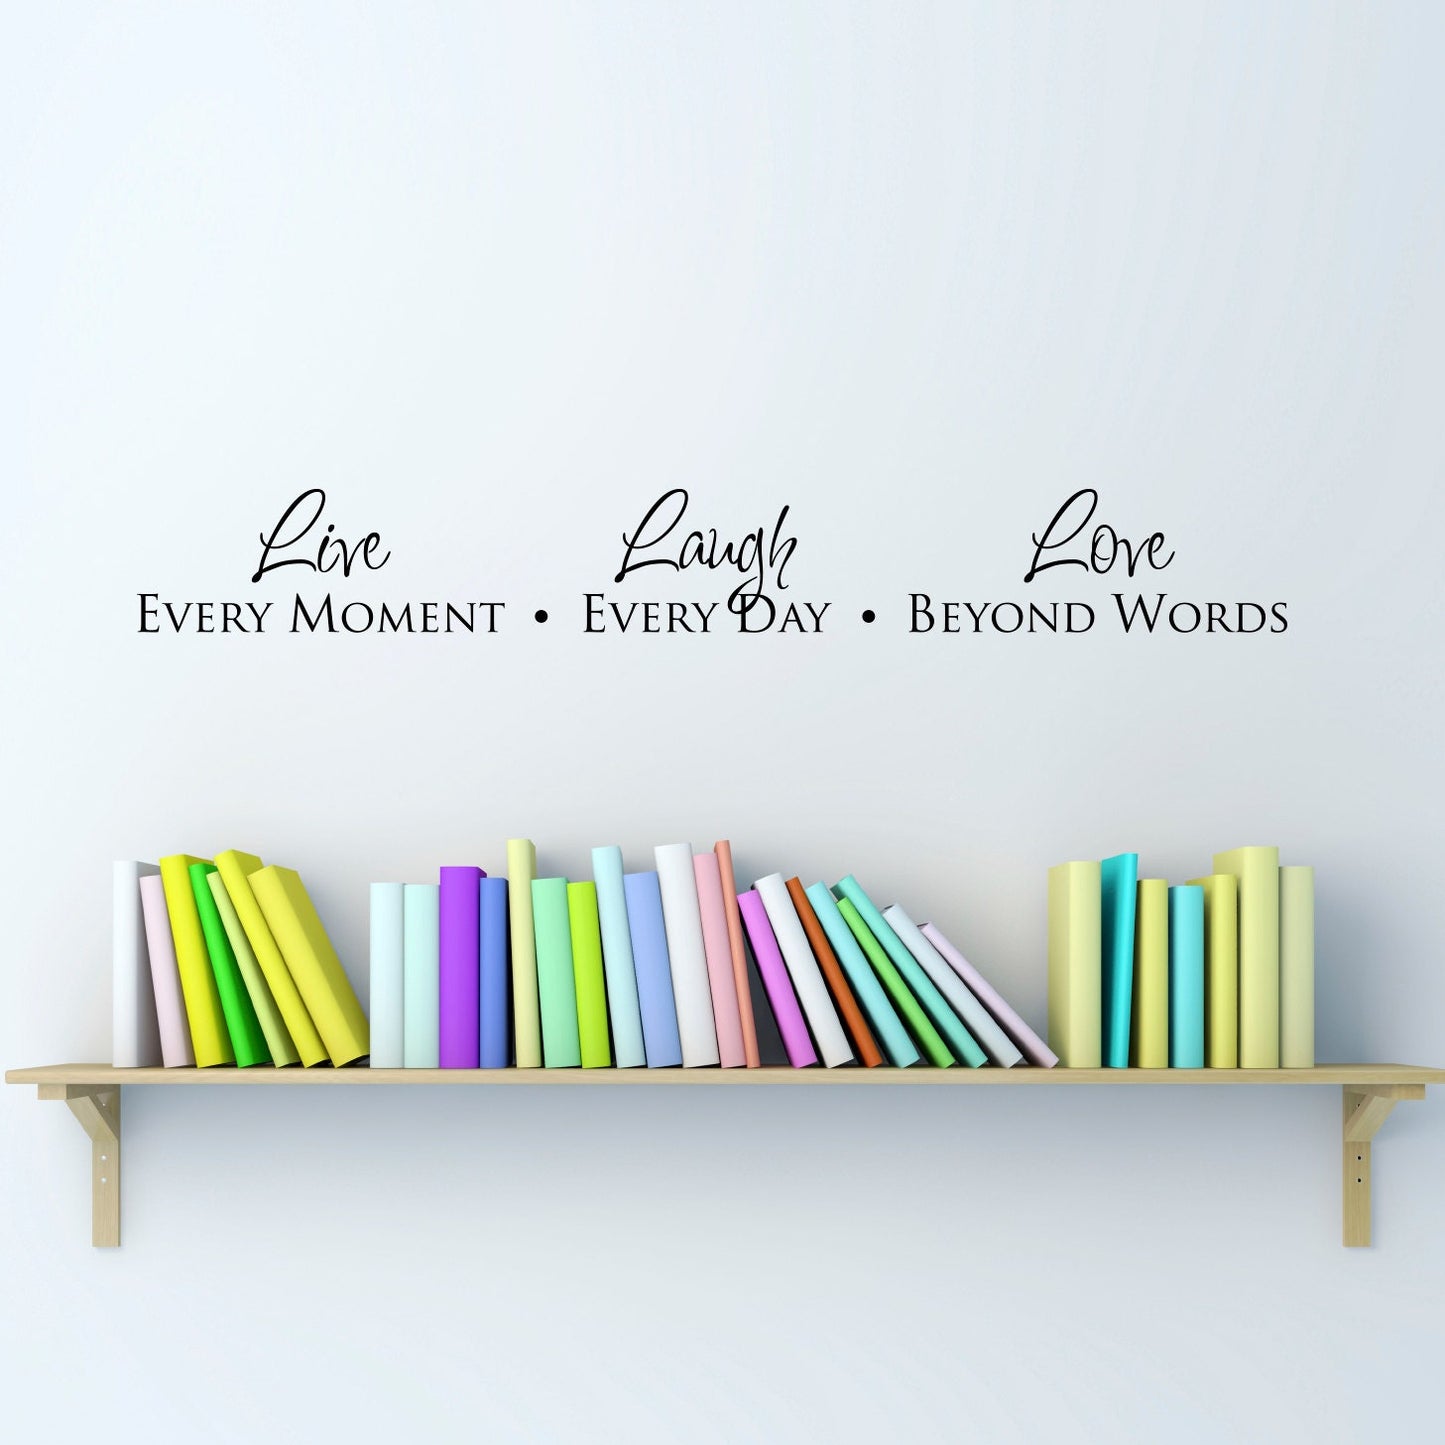 Live Laugh Love Wall Decal | Live Every Moment | Laugh Every Day | Love Beyond Words | Vinyl Decal Quote